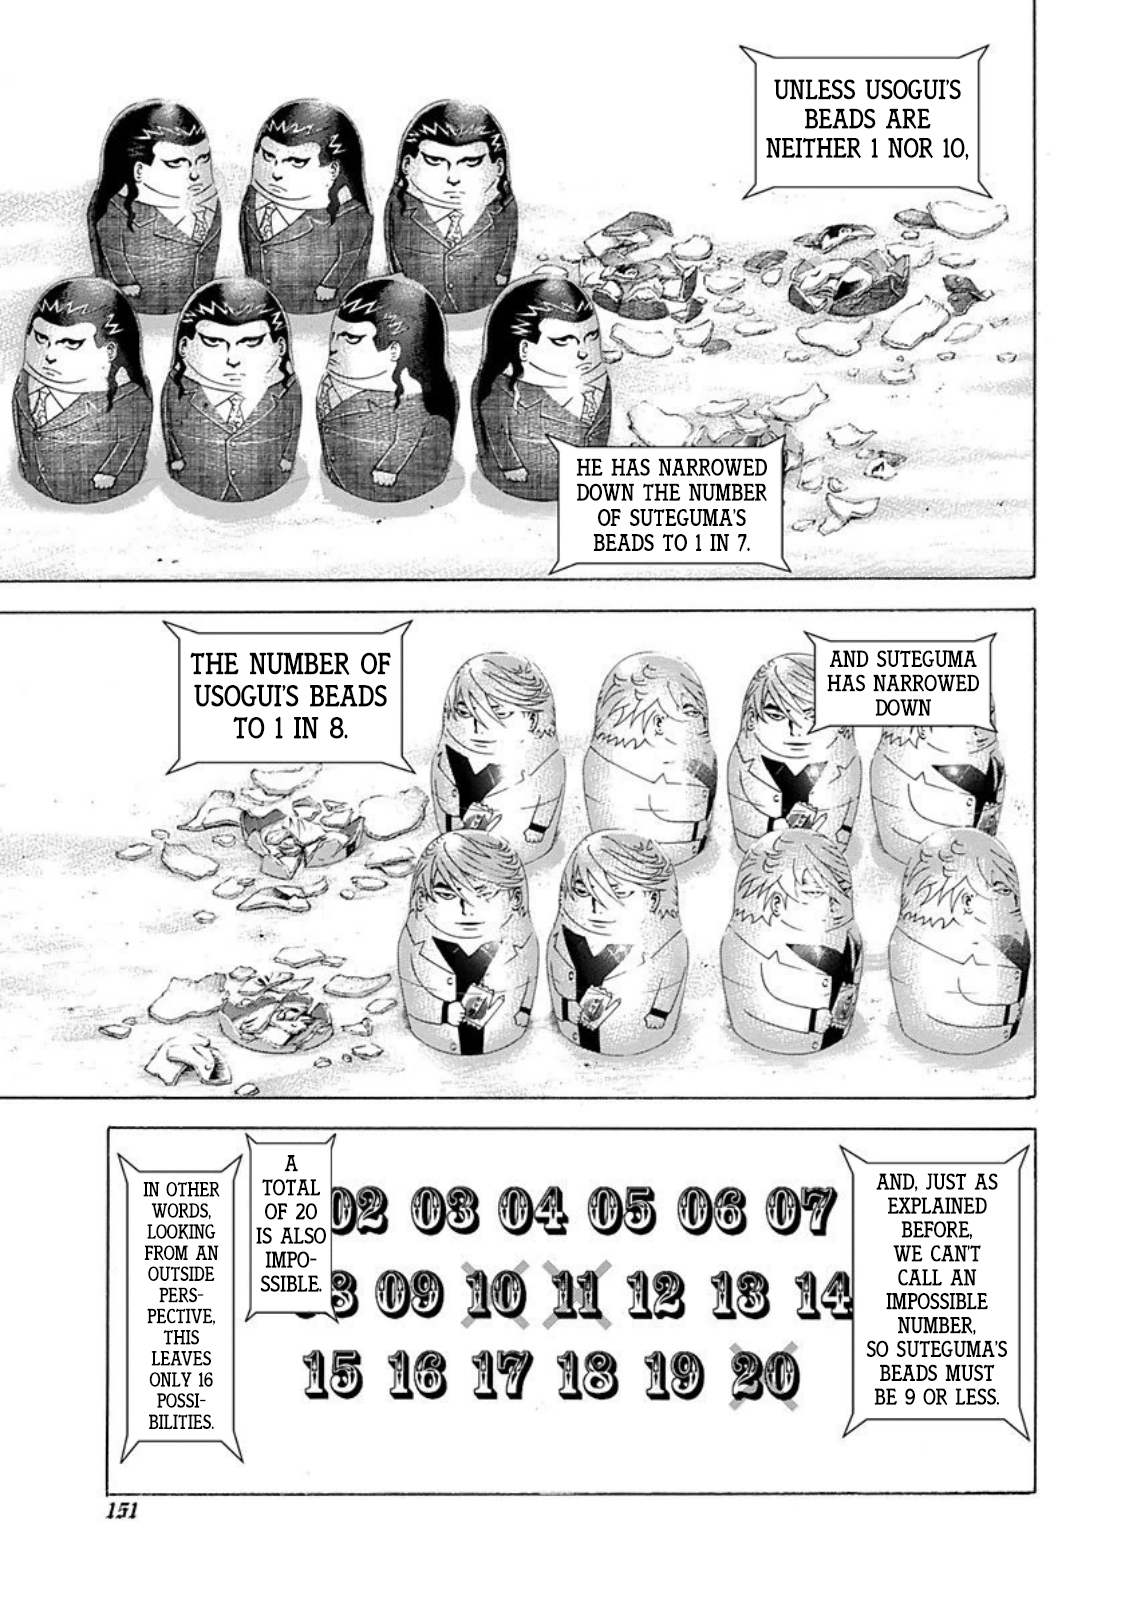 Usogui Vol. 21 Ch. 227 The Chief Of The Private Funeral Division